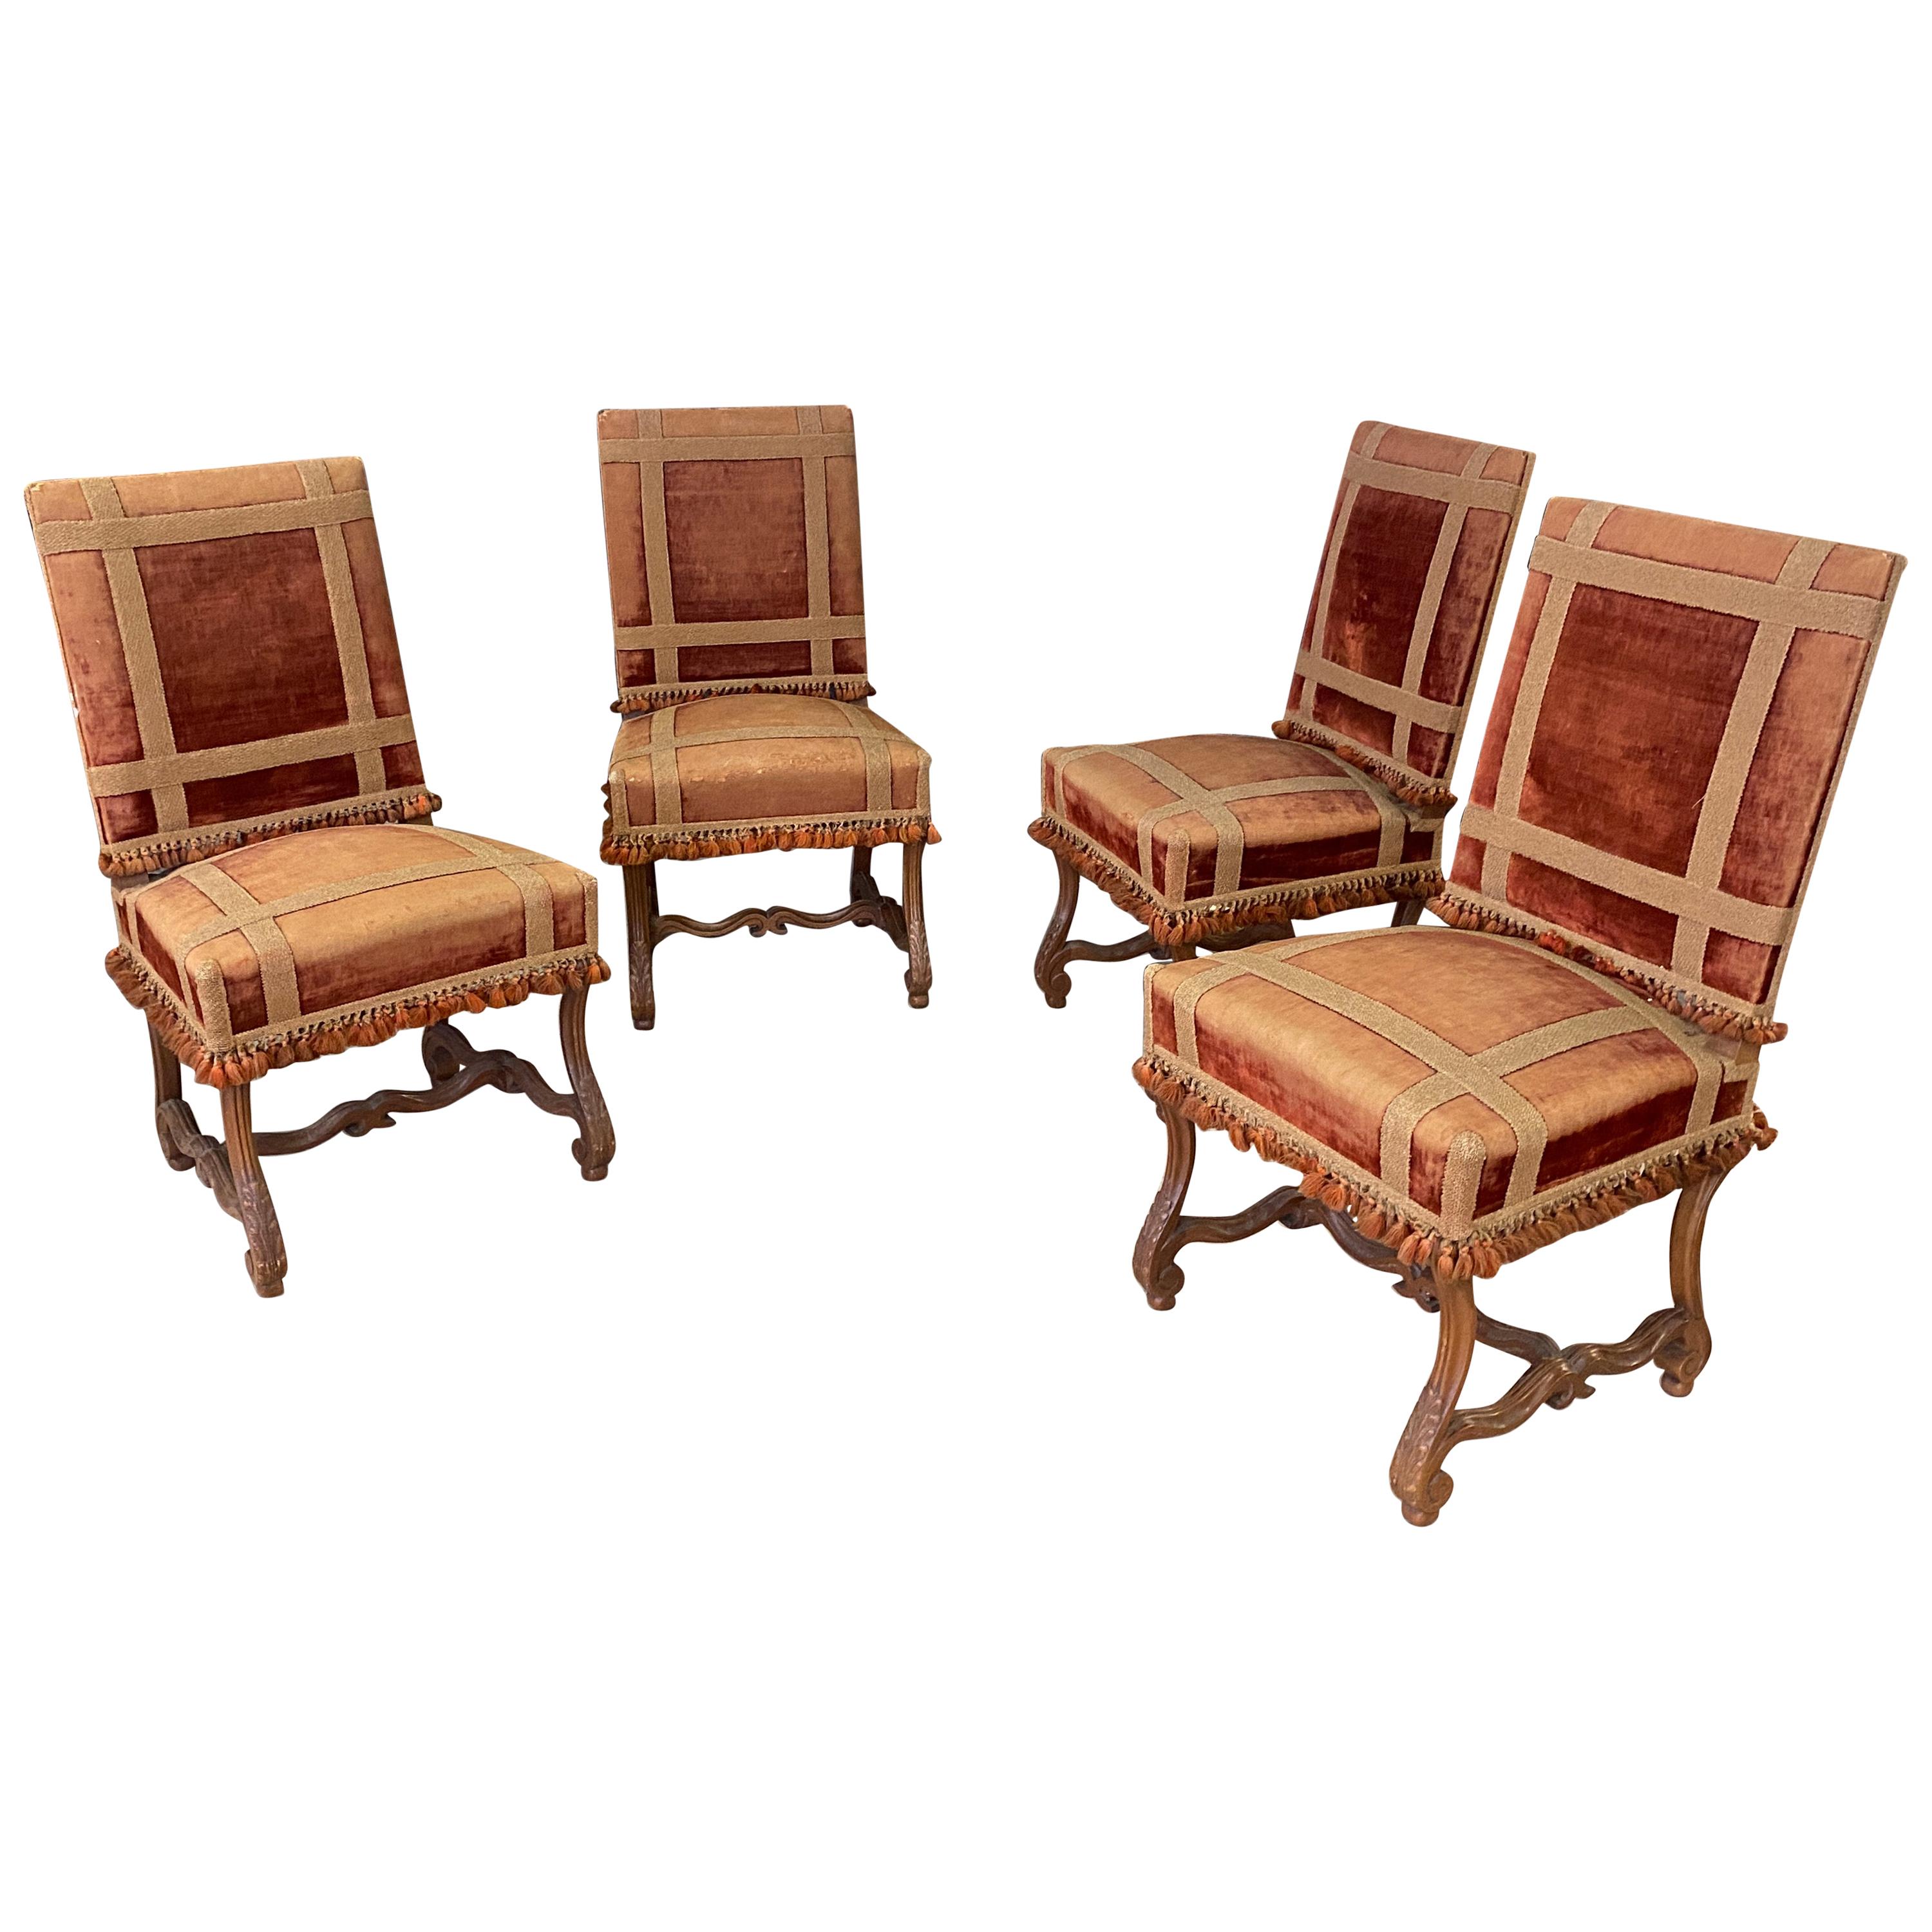  4 Large Old Louis XIV Chairs in Walnut, 19th Century, from a Castle